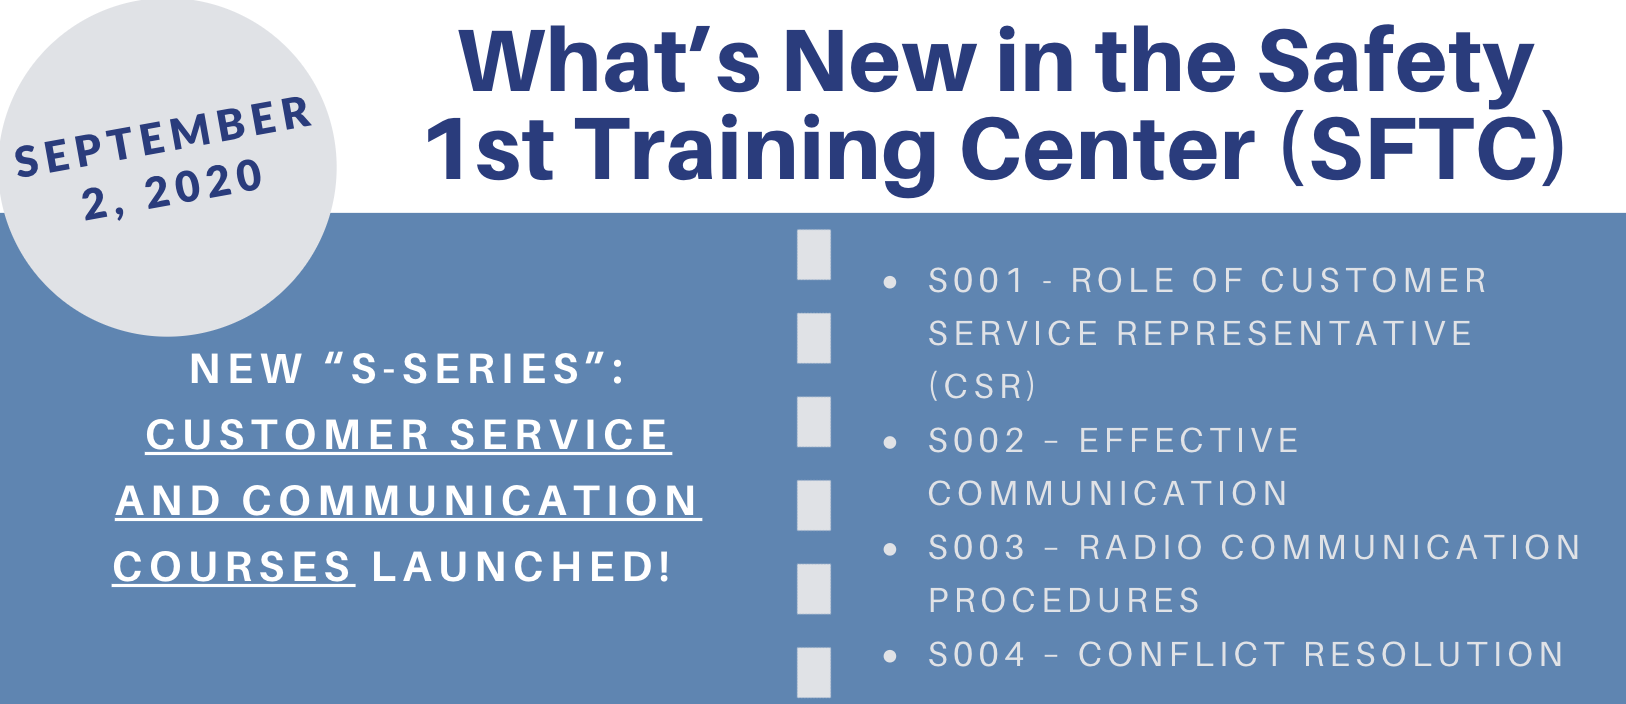 What’s New in the Safety 1st Training Center (SFTC)